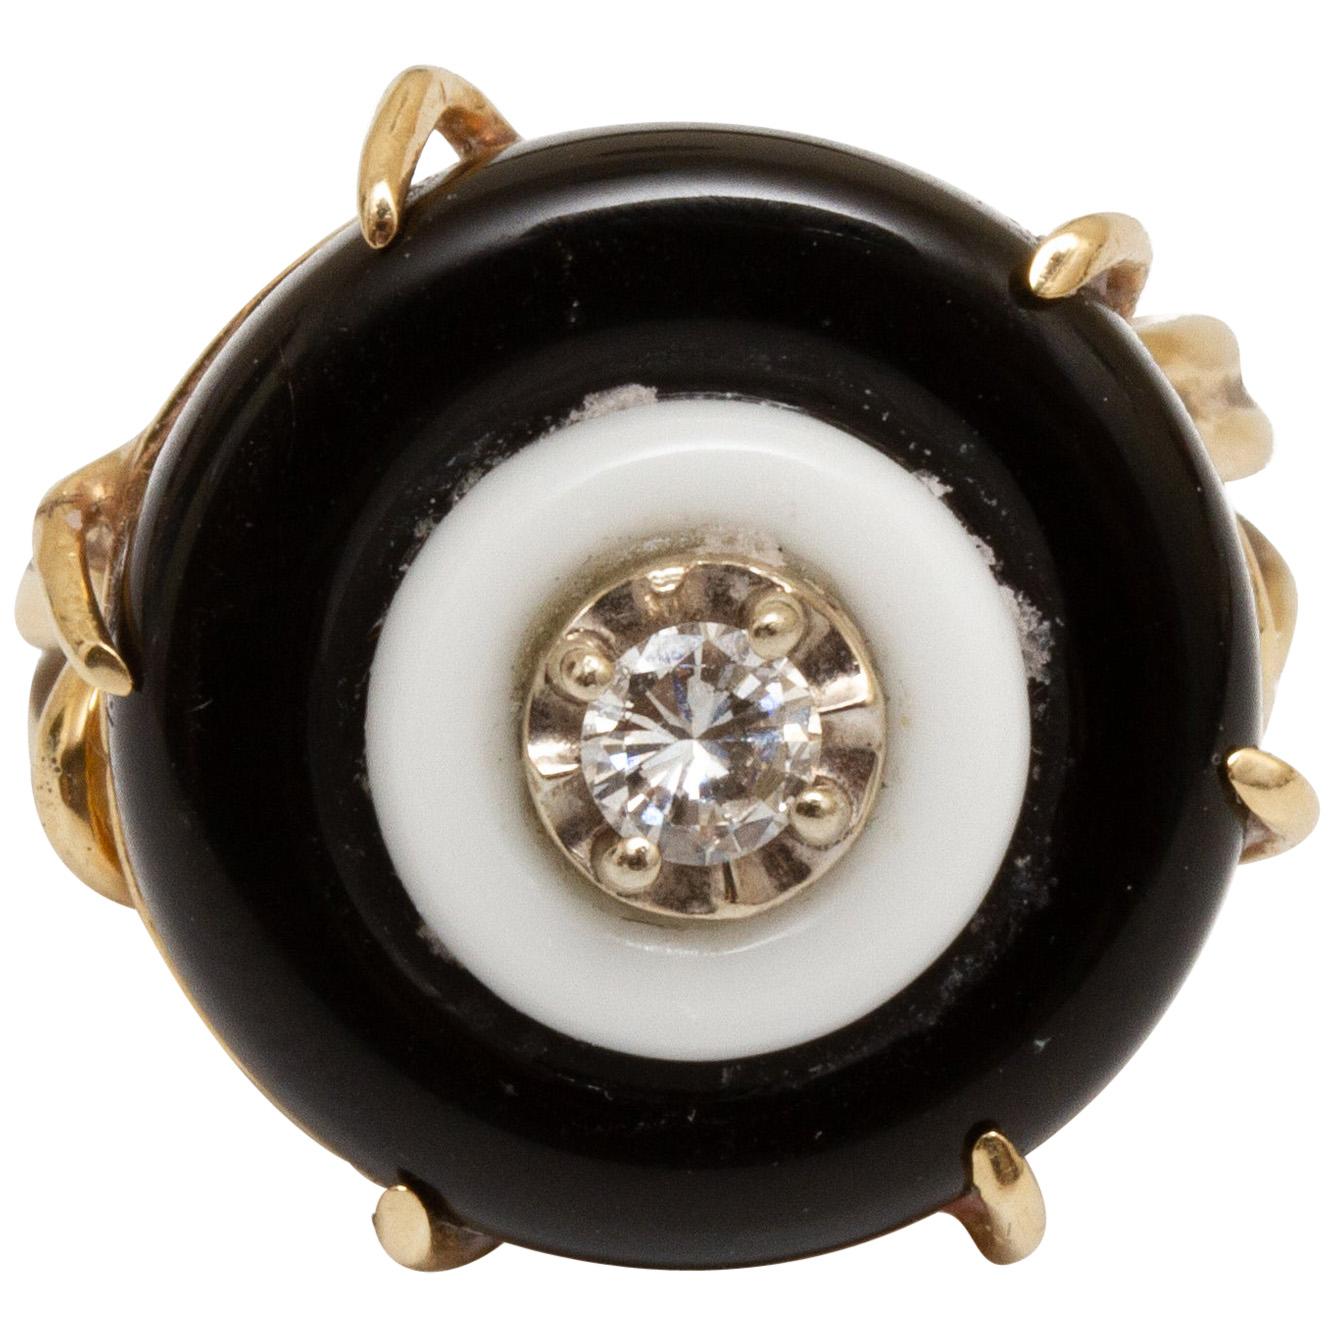 Gold, Black and White Onyx and Diamond Ring